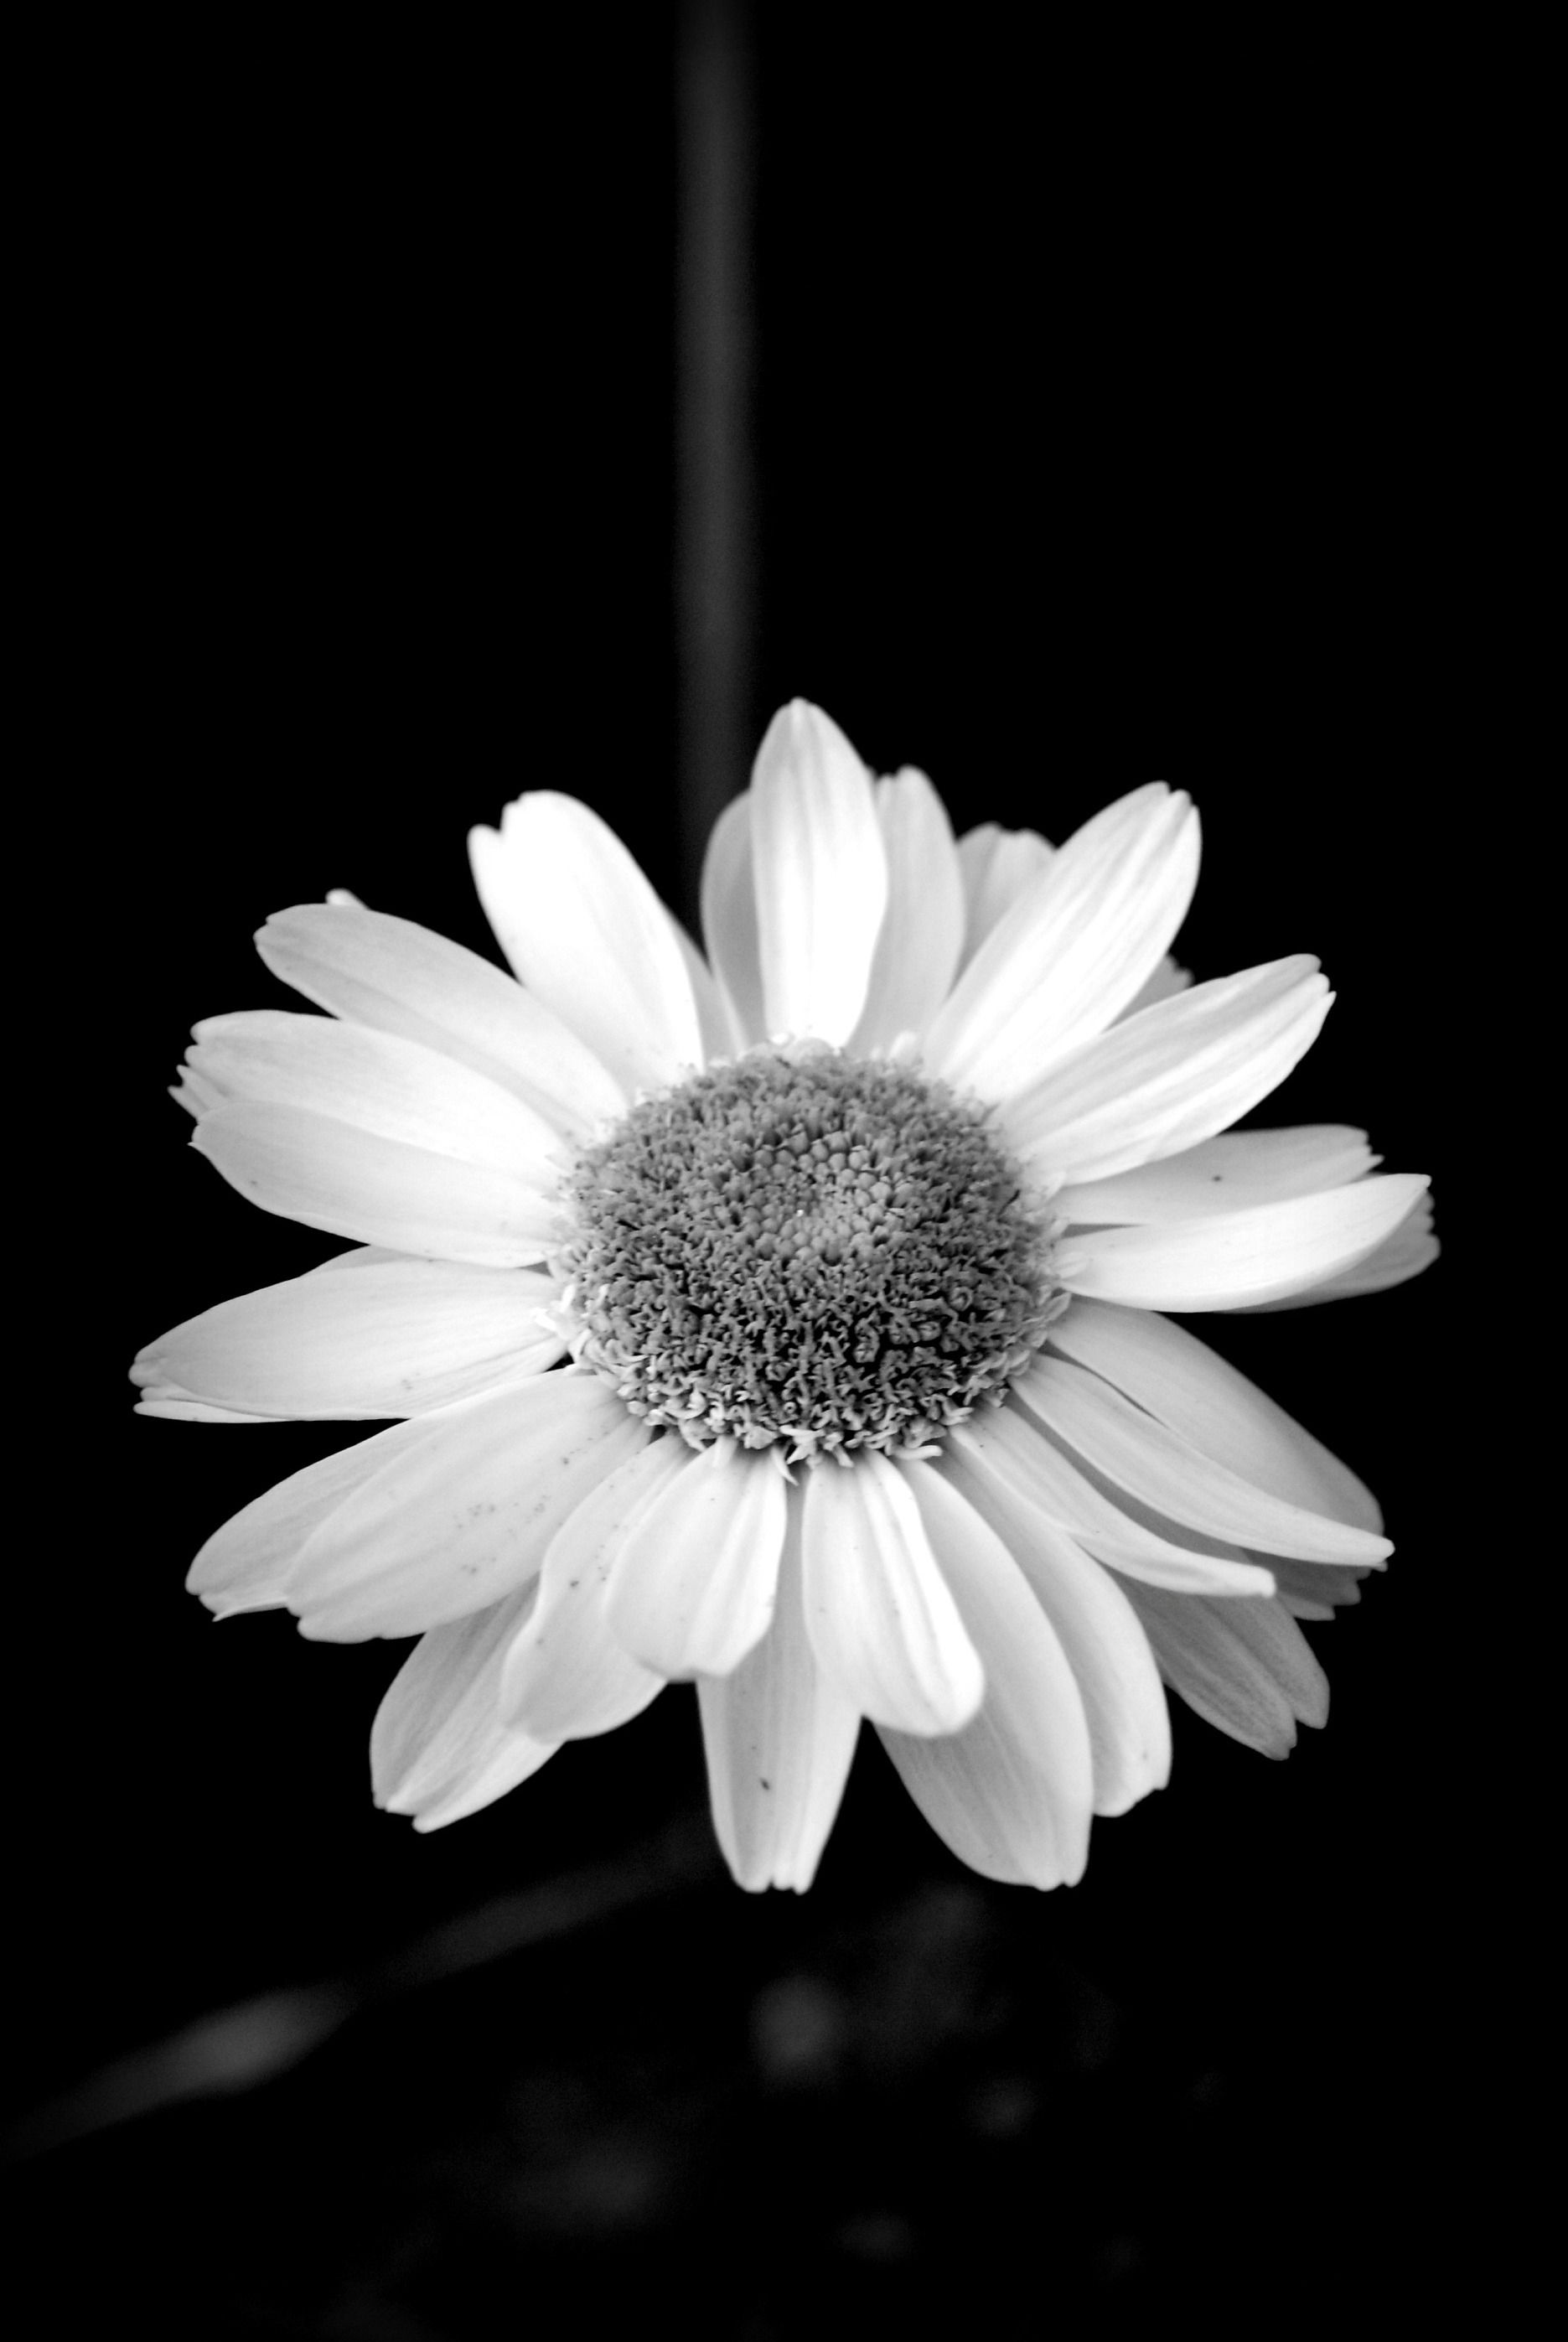 Daisy in black and white | Sea Shell Moments | Pinterest | Black